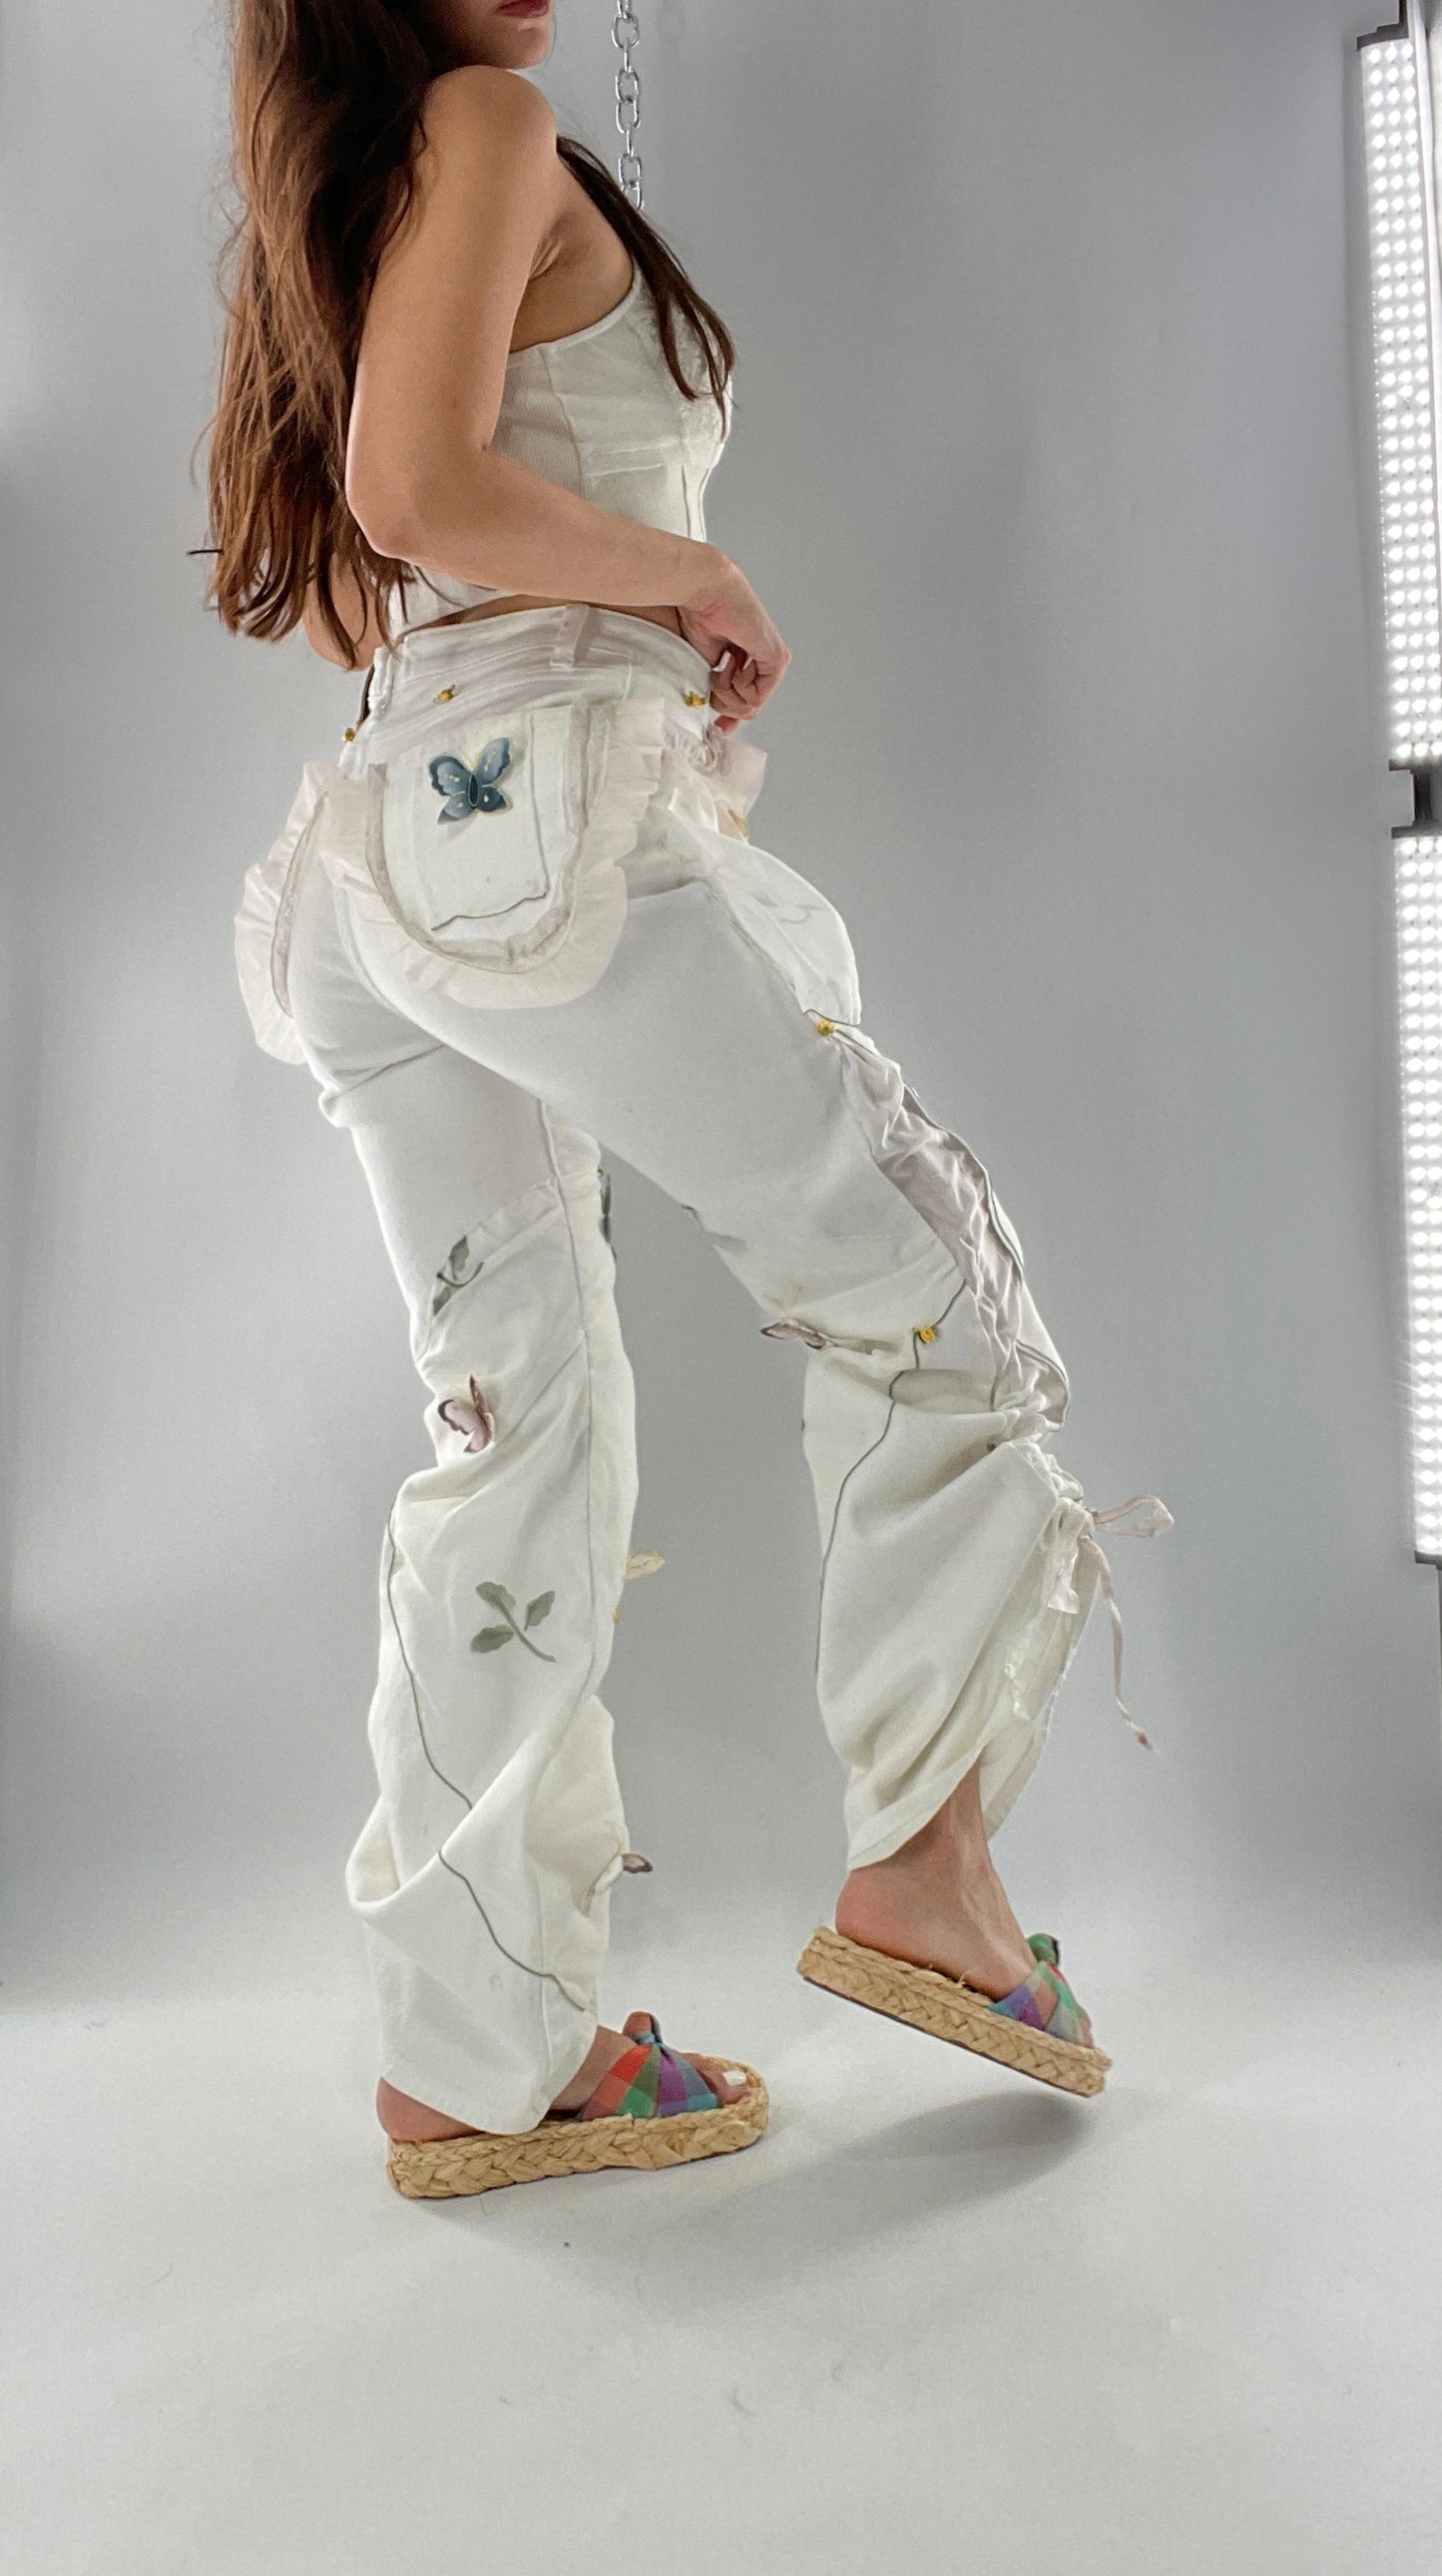 Remade Upcycled Lee White Jeans with Drawstring Adjustable Length, Lace Trim Pockets, Embroidery and Appliqué Details (27)